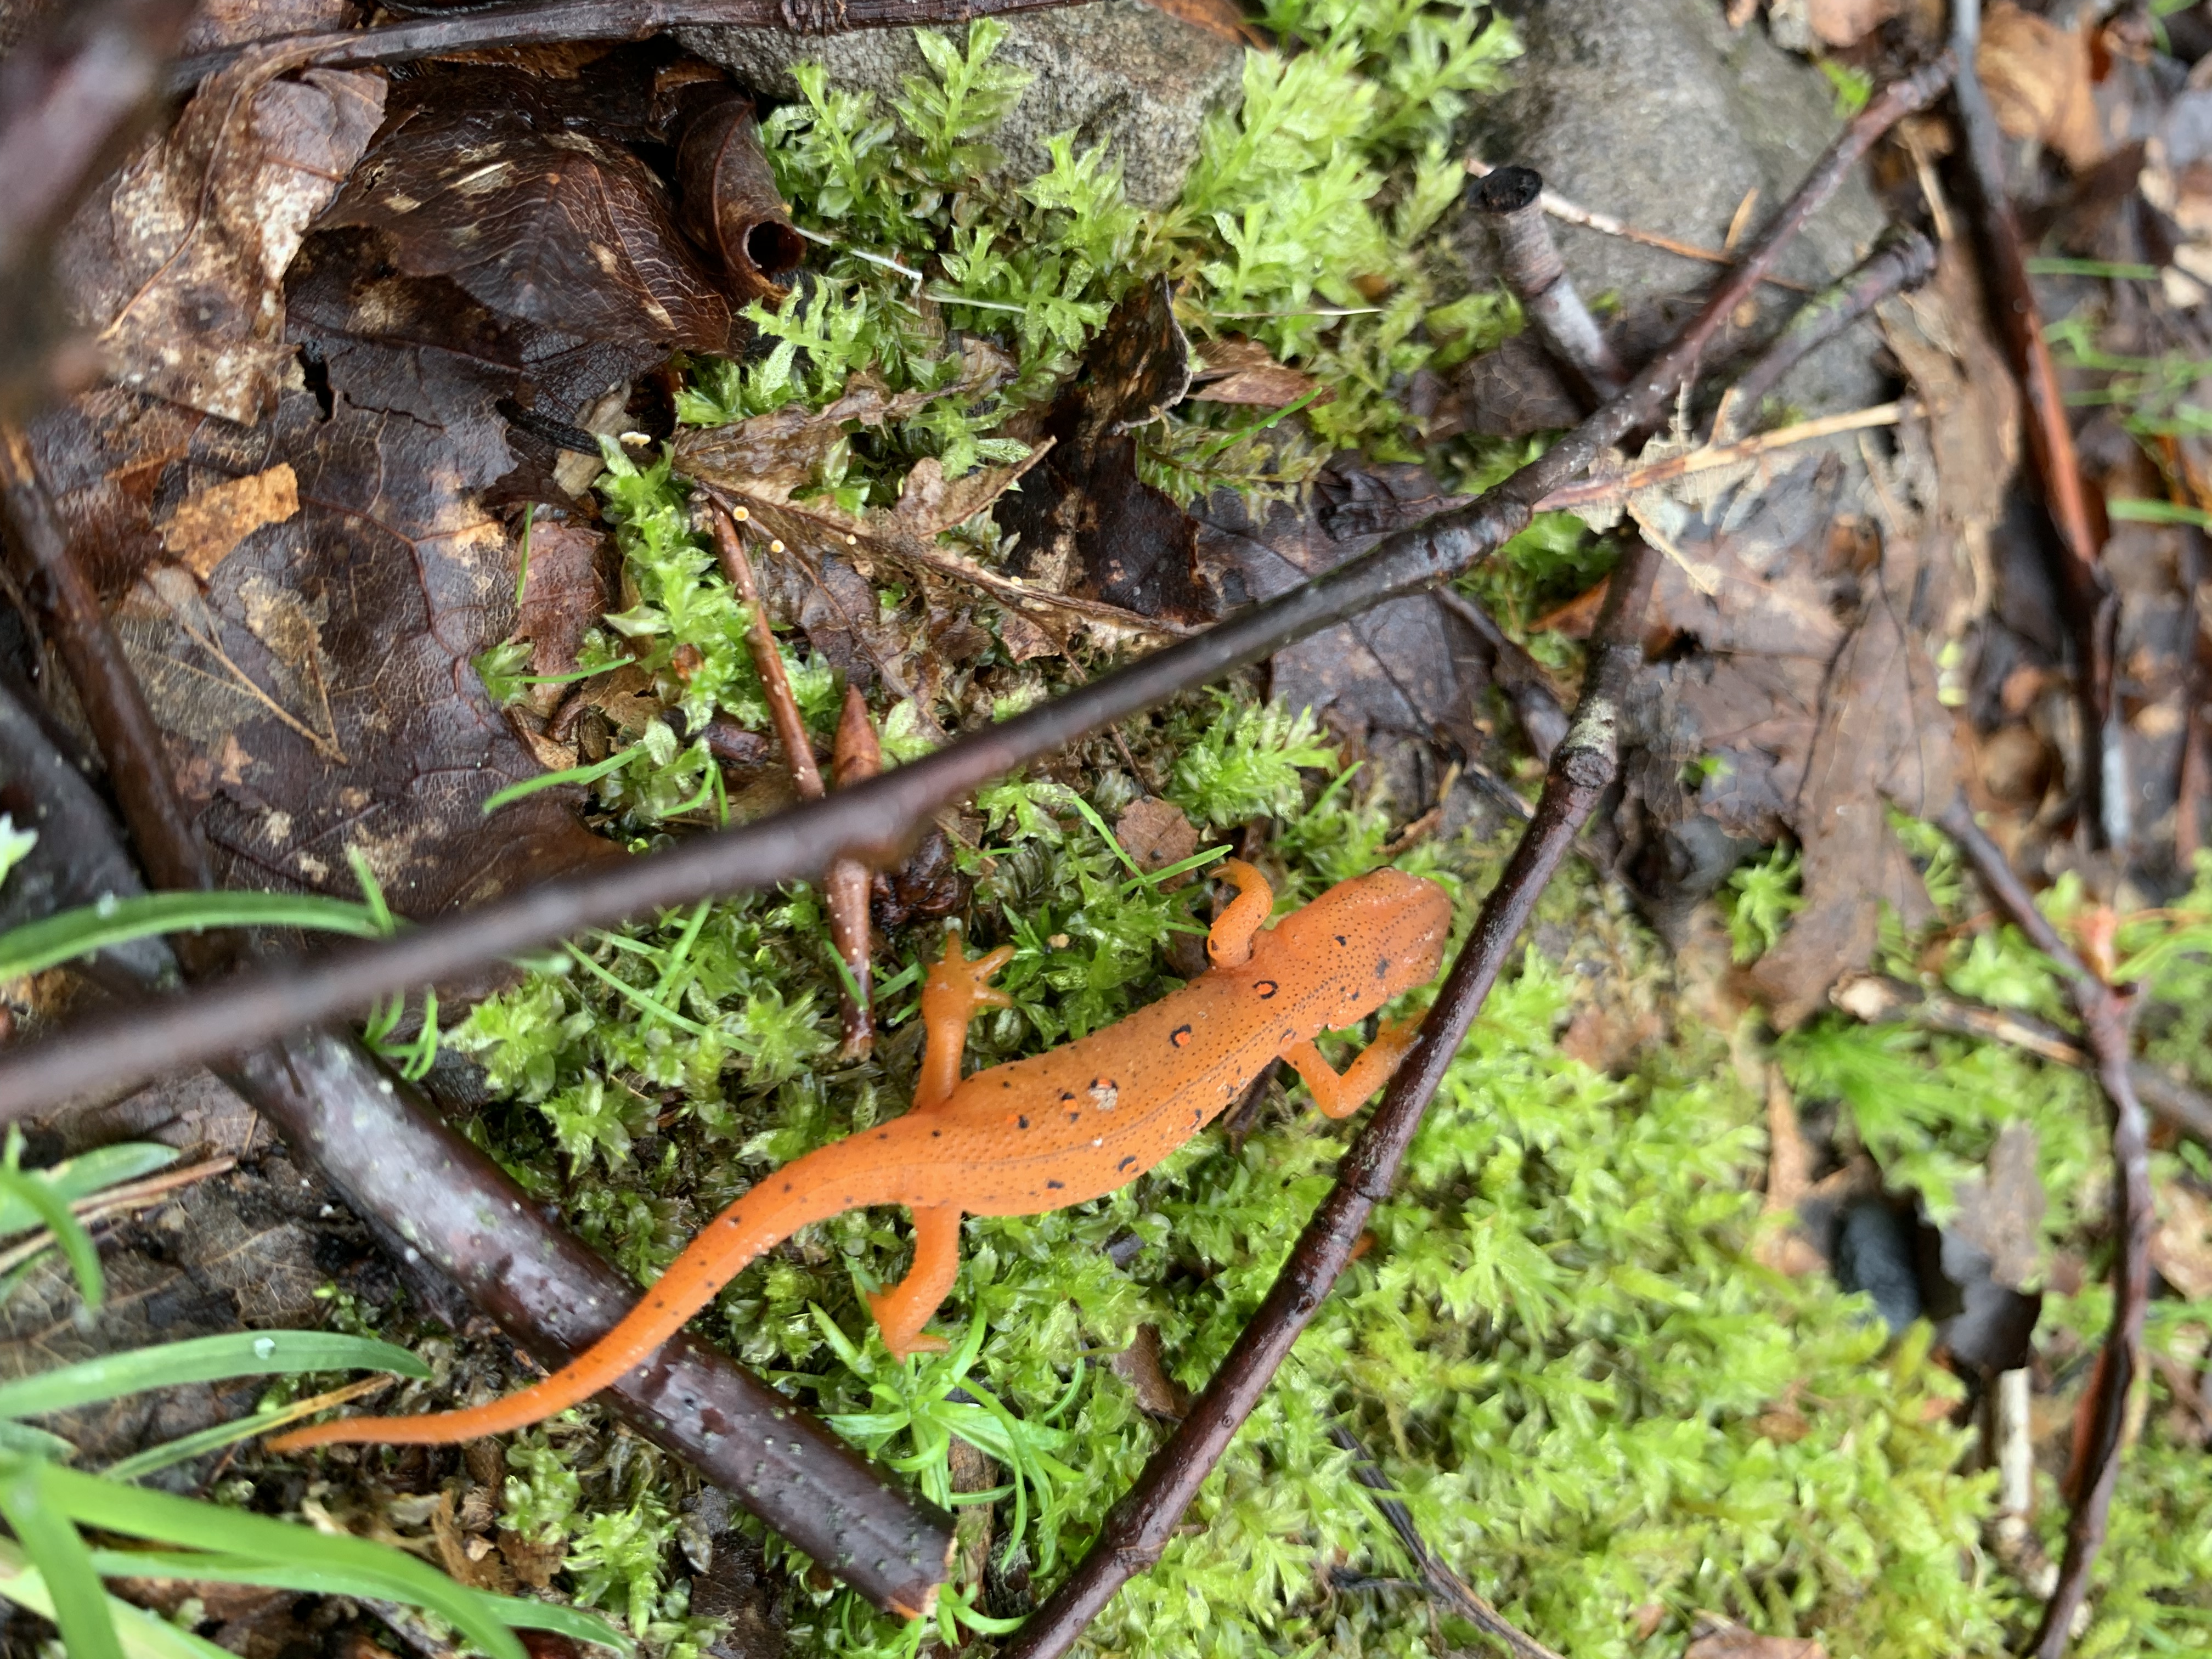 Juvenile Eastern (Red-Spotted) Newt